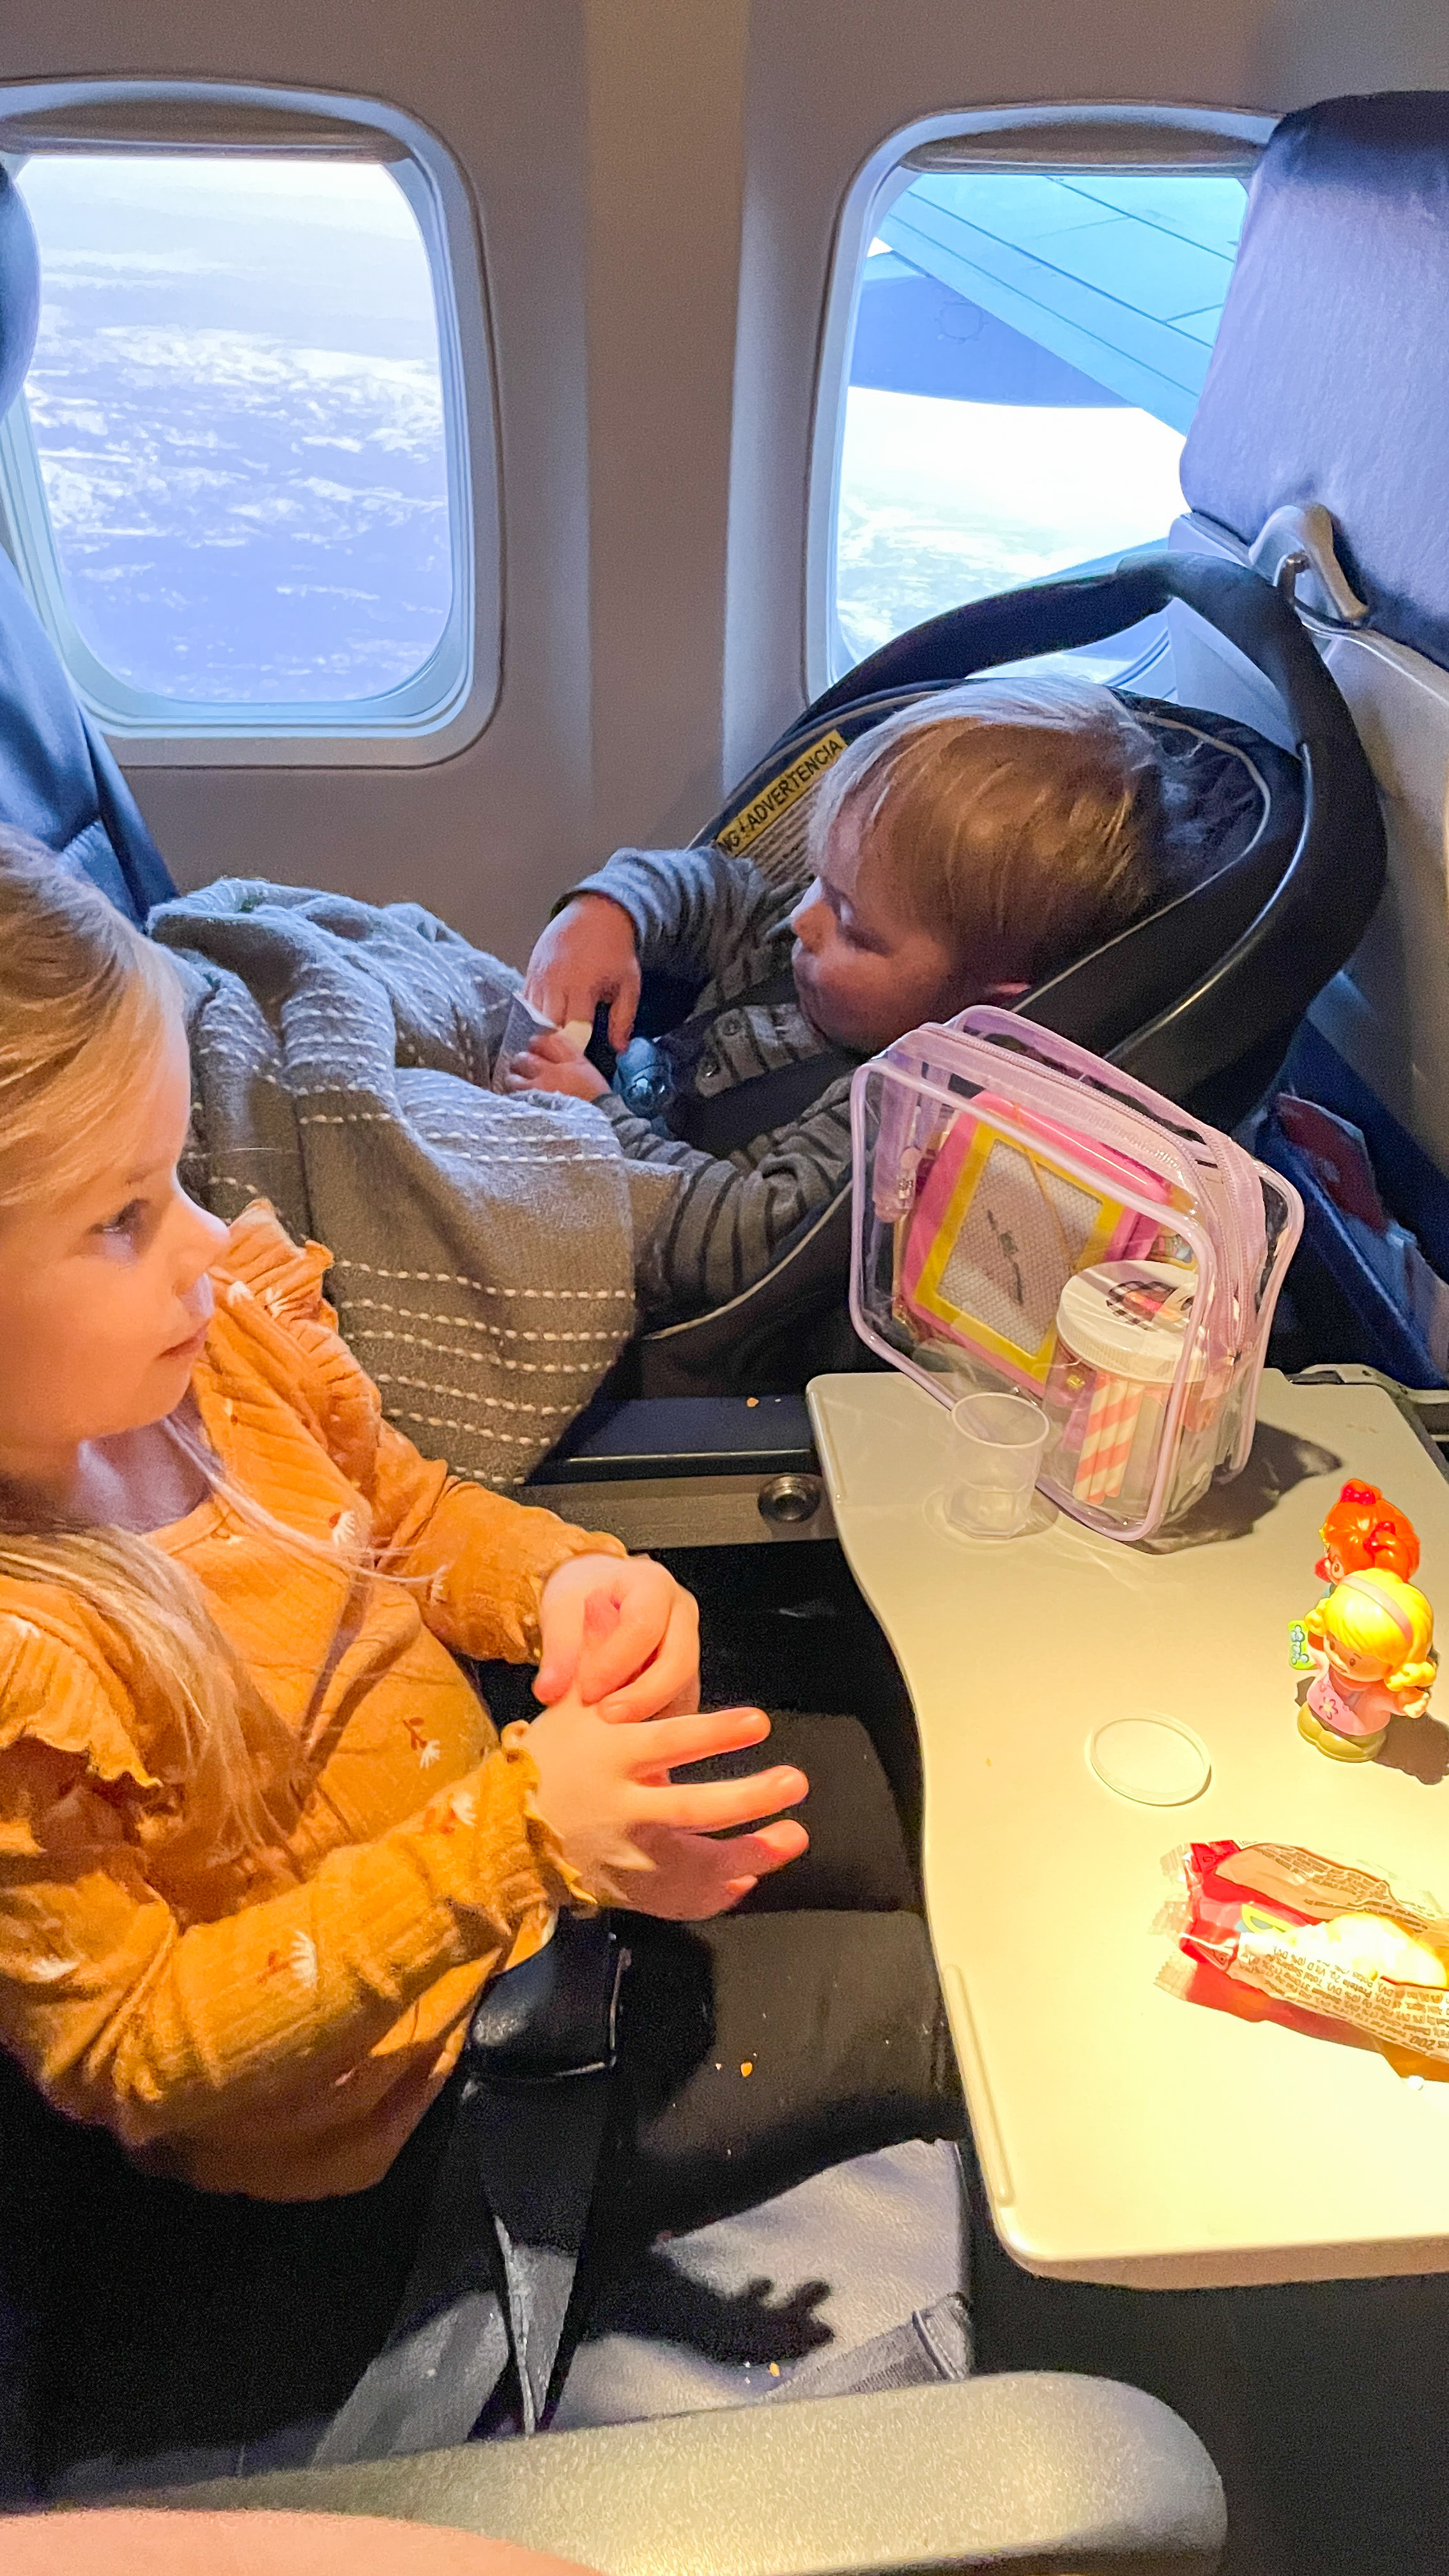 Airplane travel essentials for toddlers to keep them engaged +pass